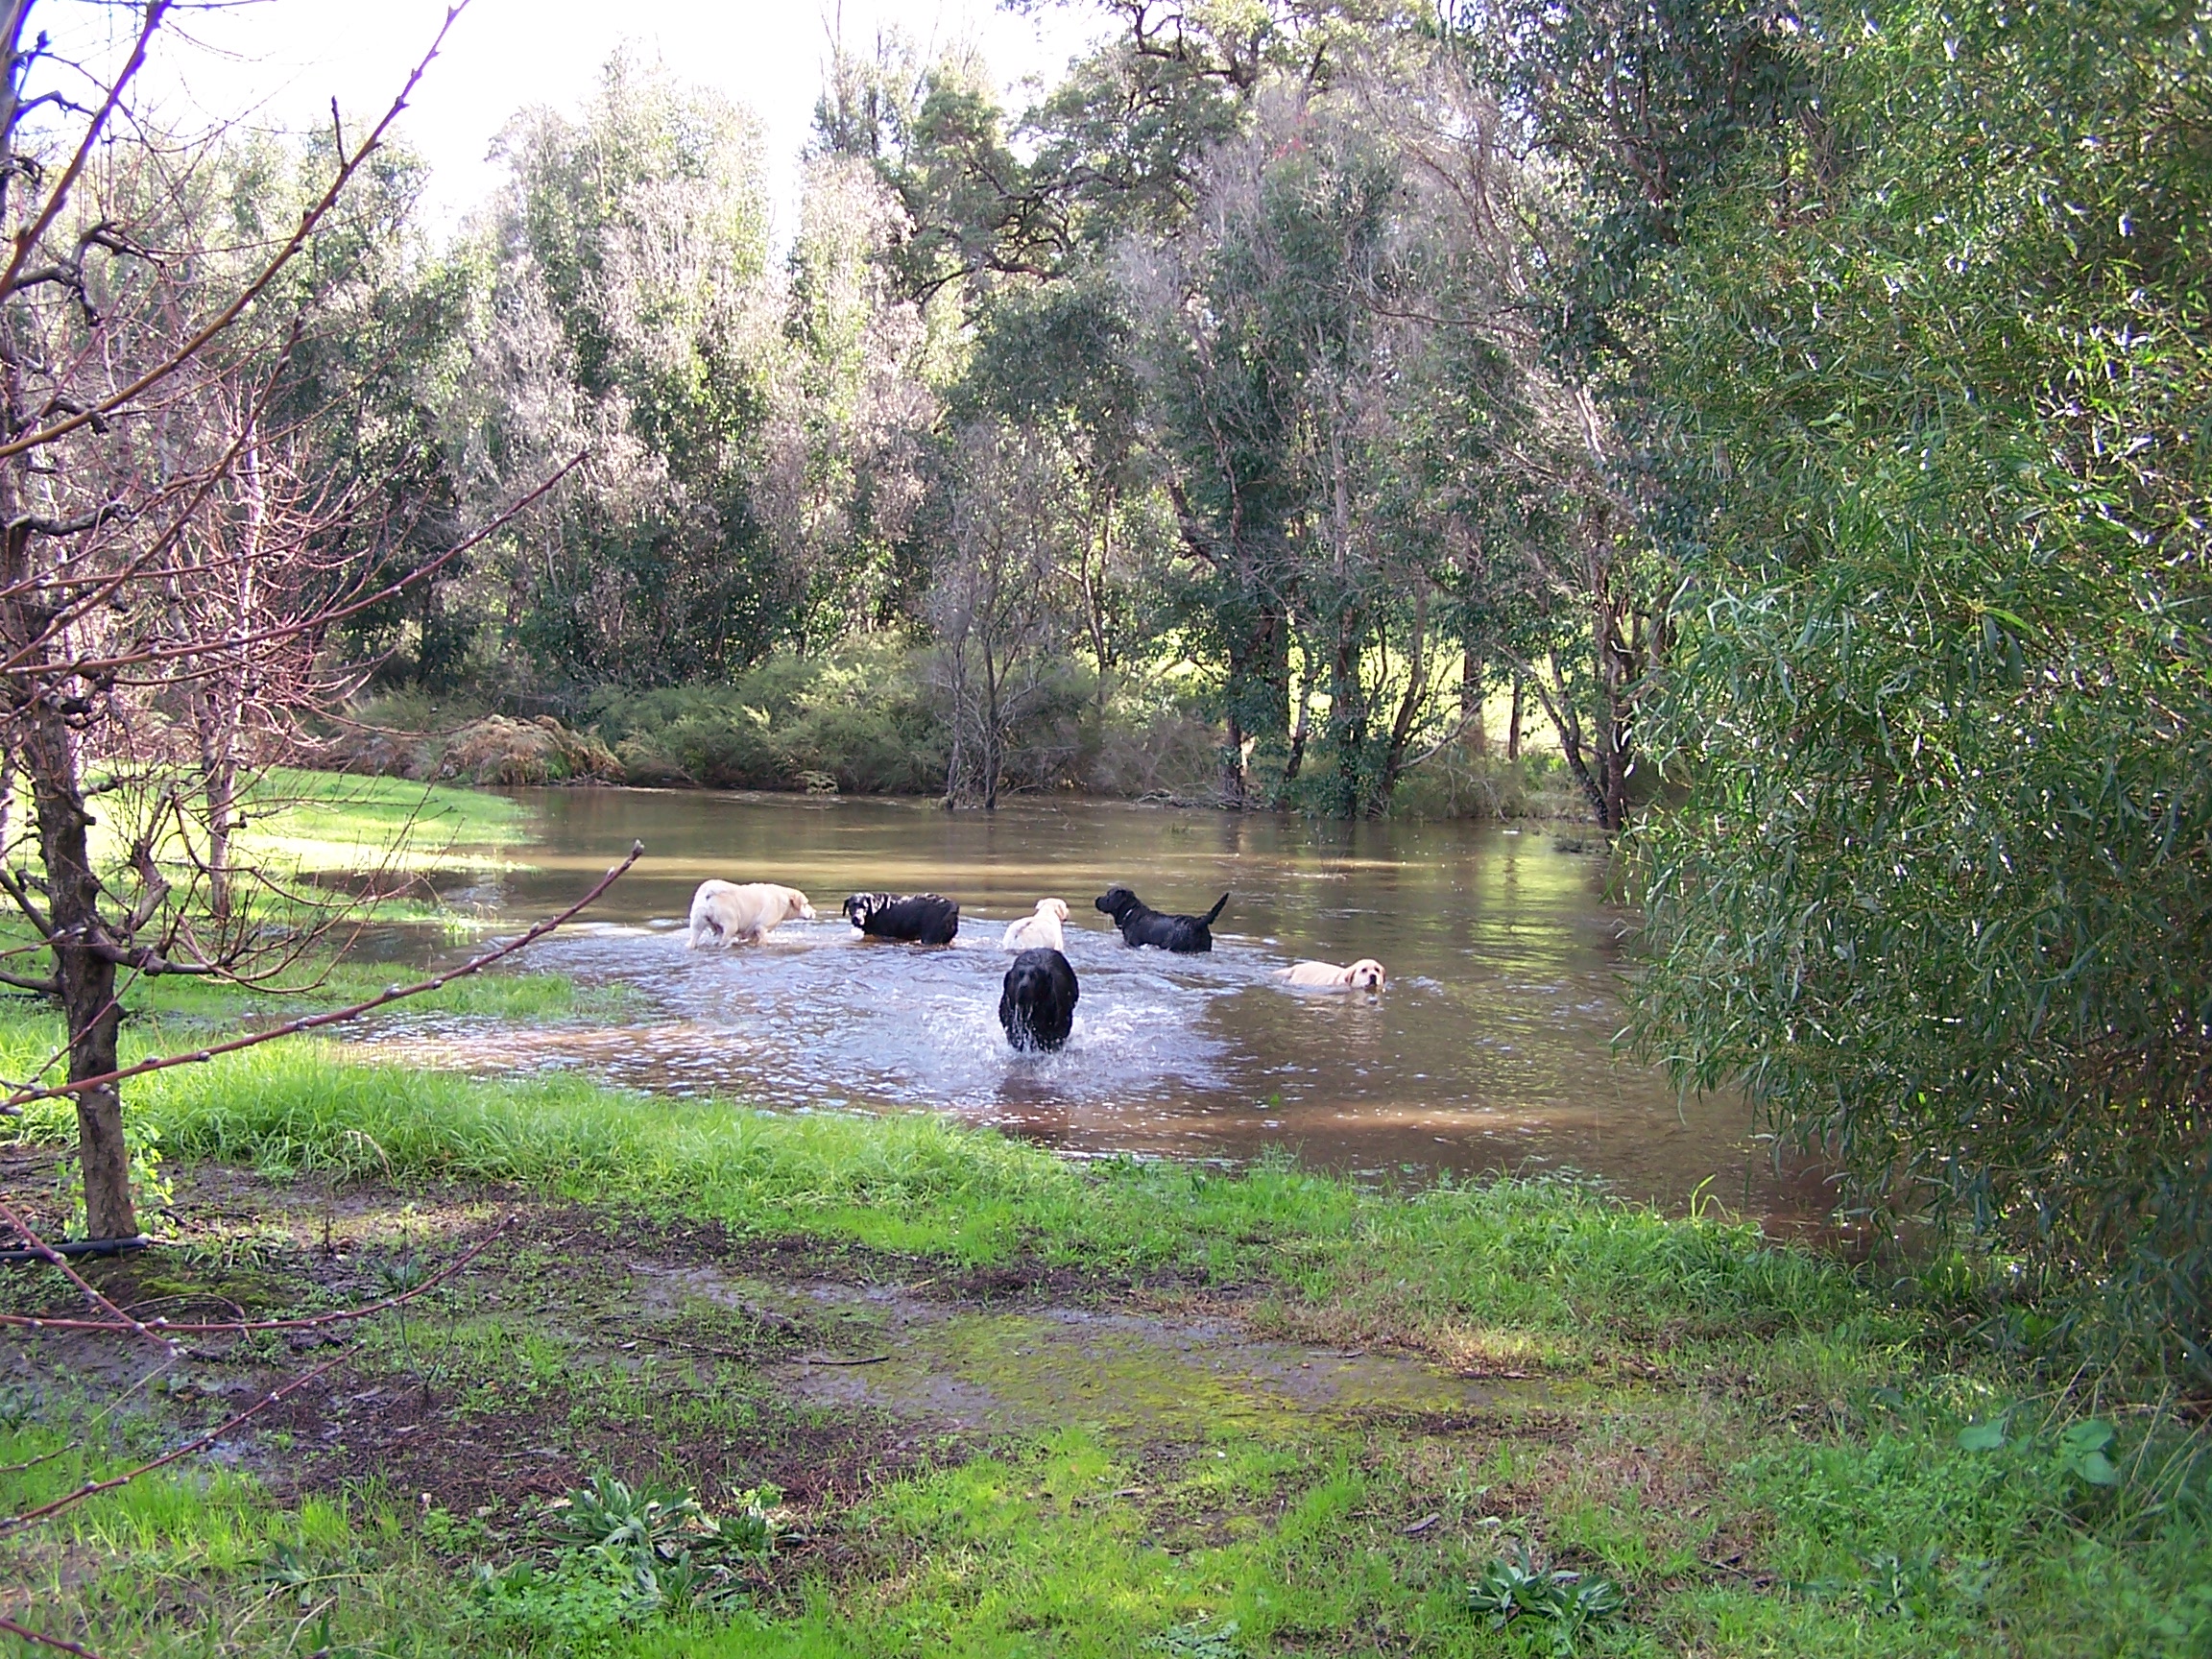 Dogs swimming in orchard